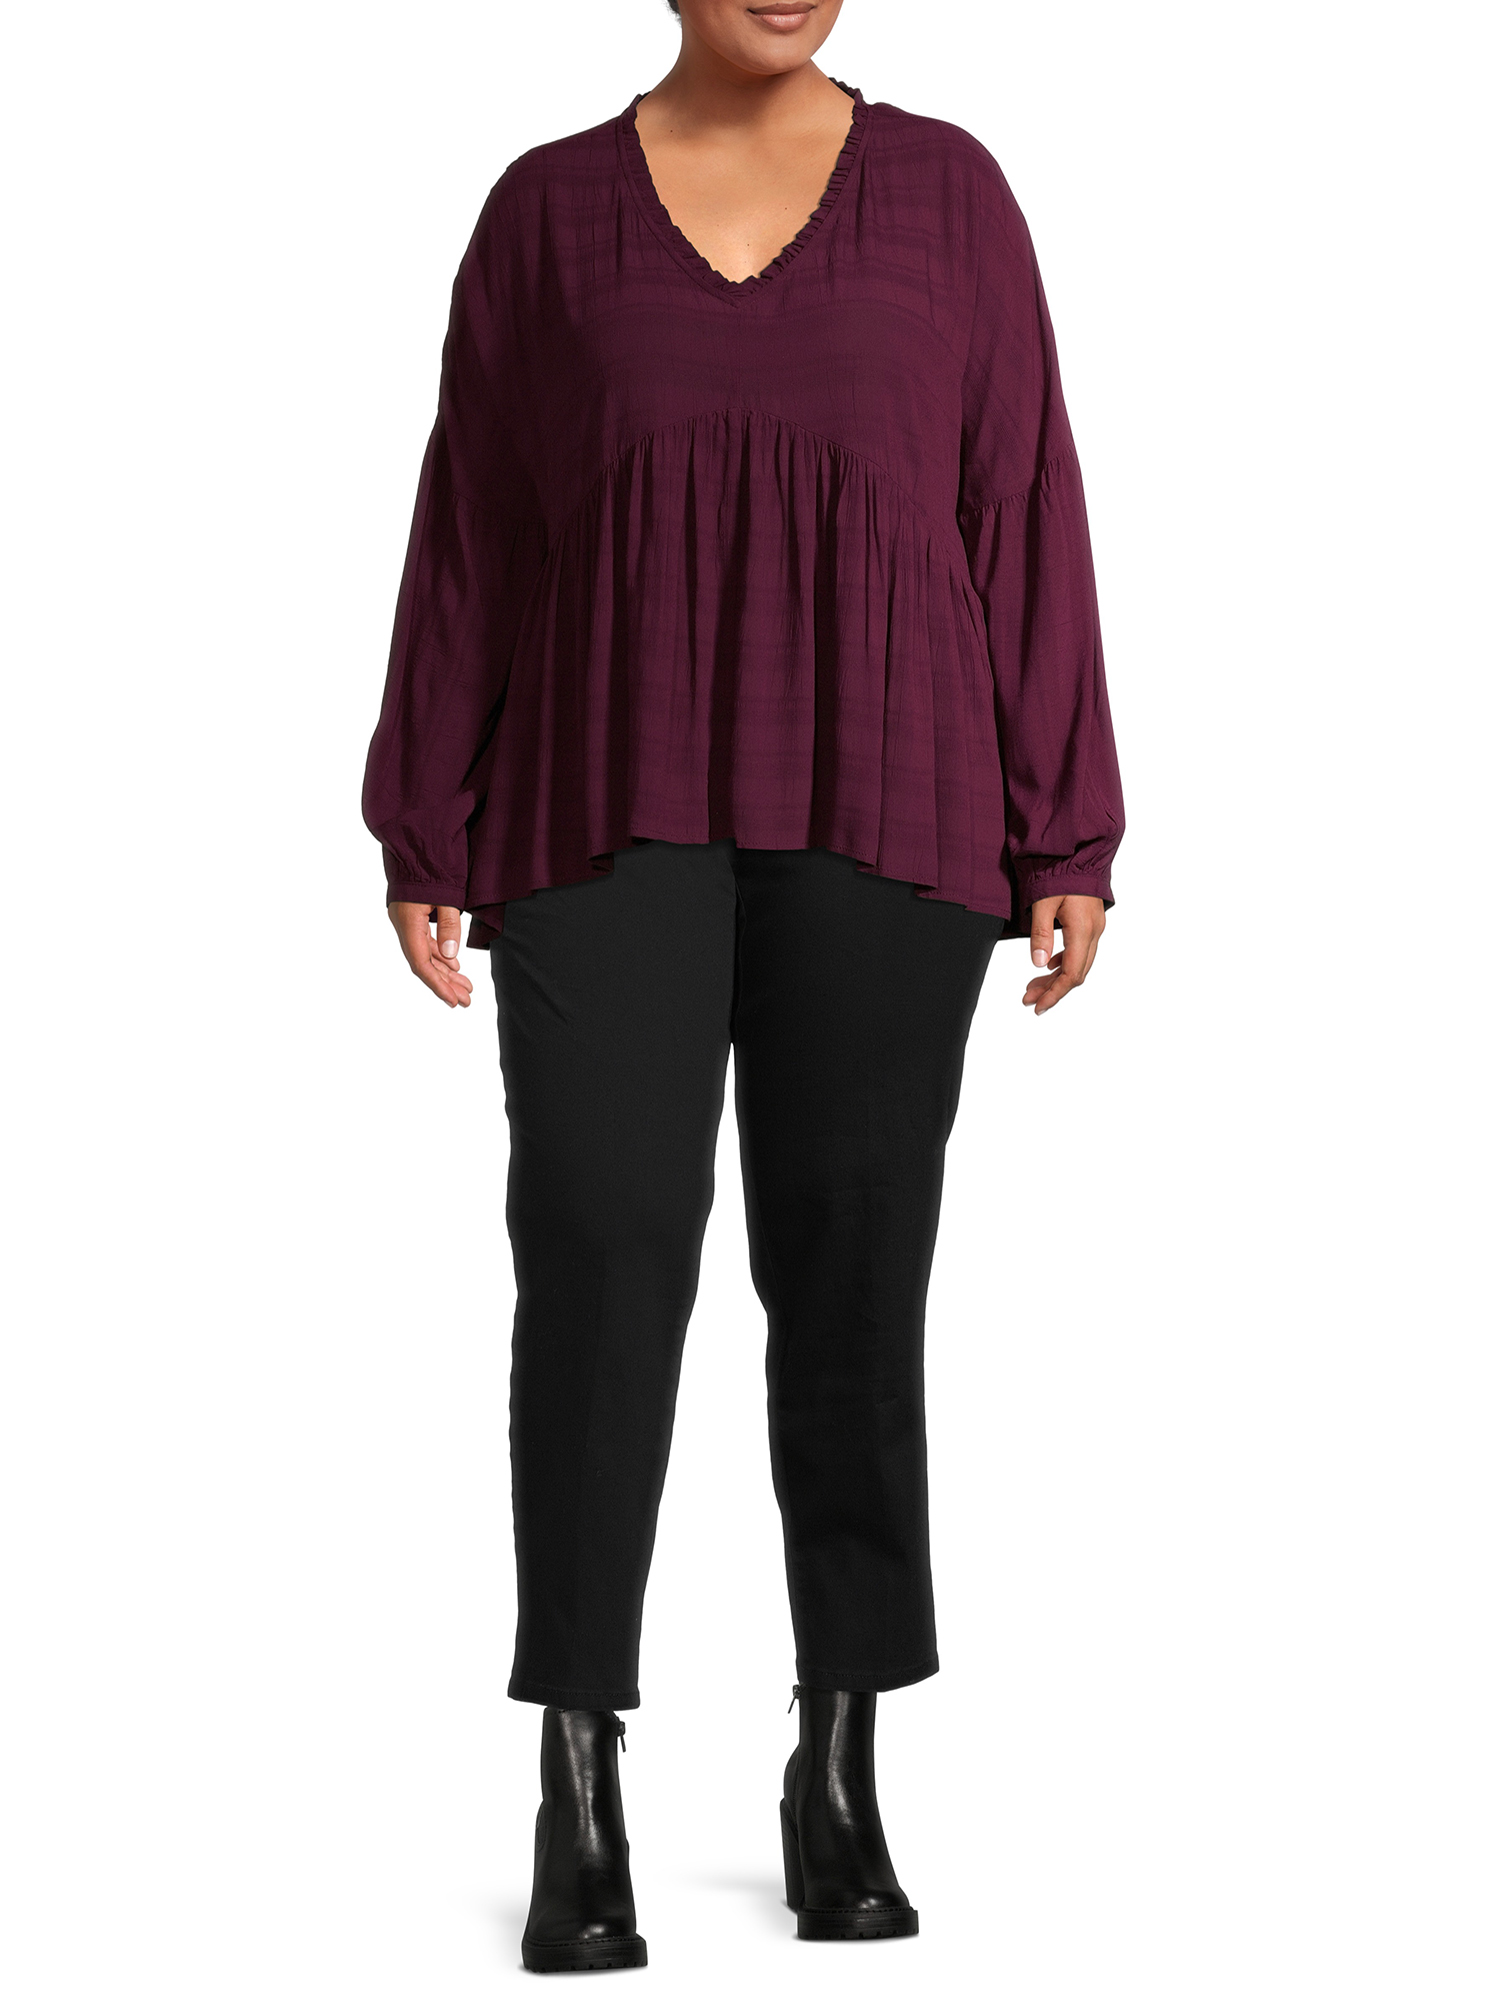 Just My Size Women's Plus 2 Pocket Pull-On Pant - image 2 of 6